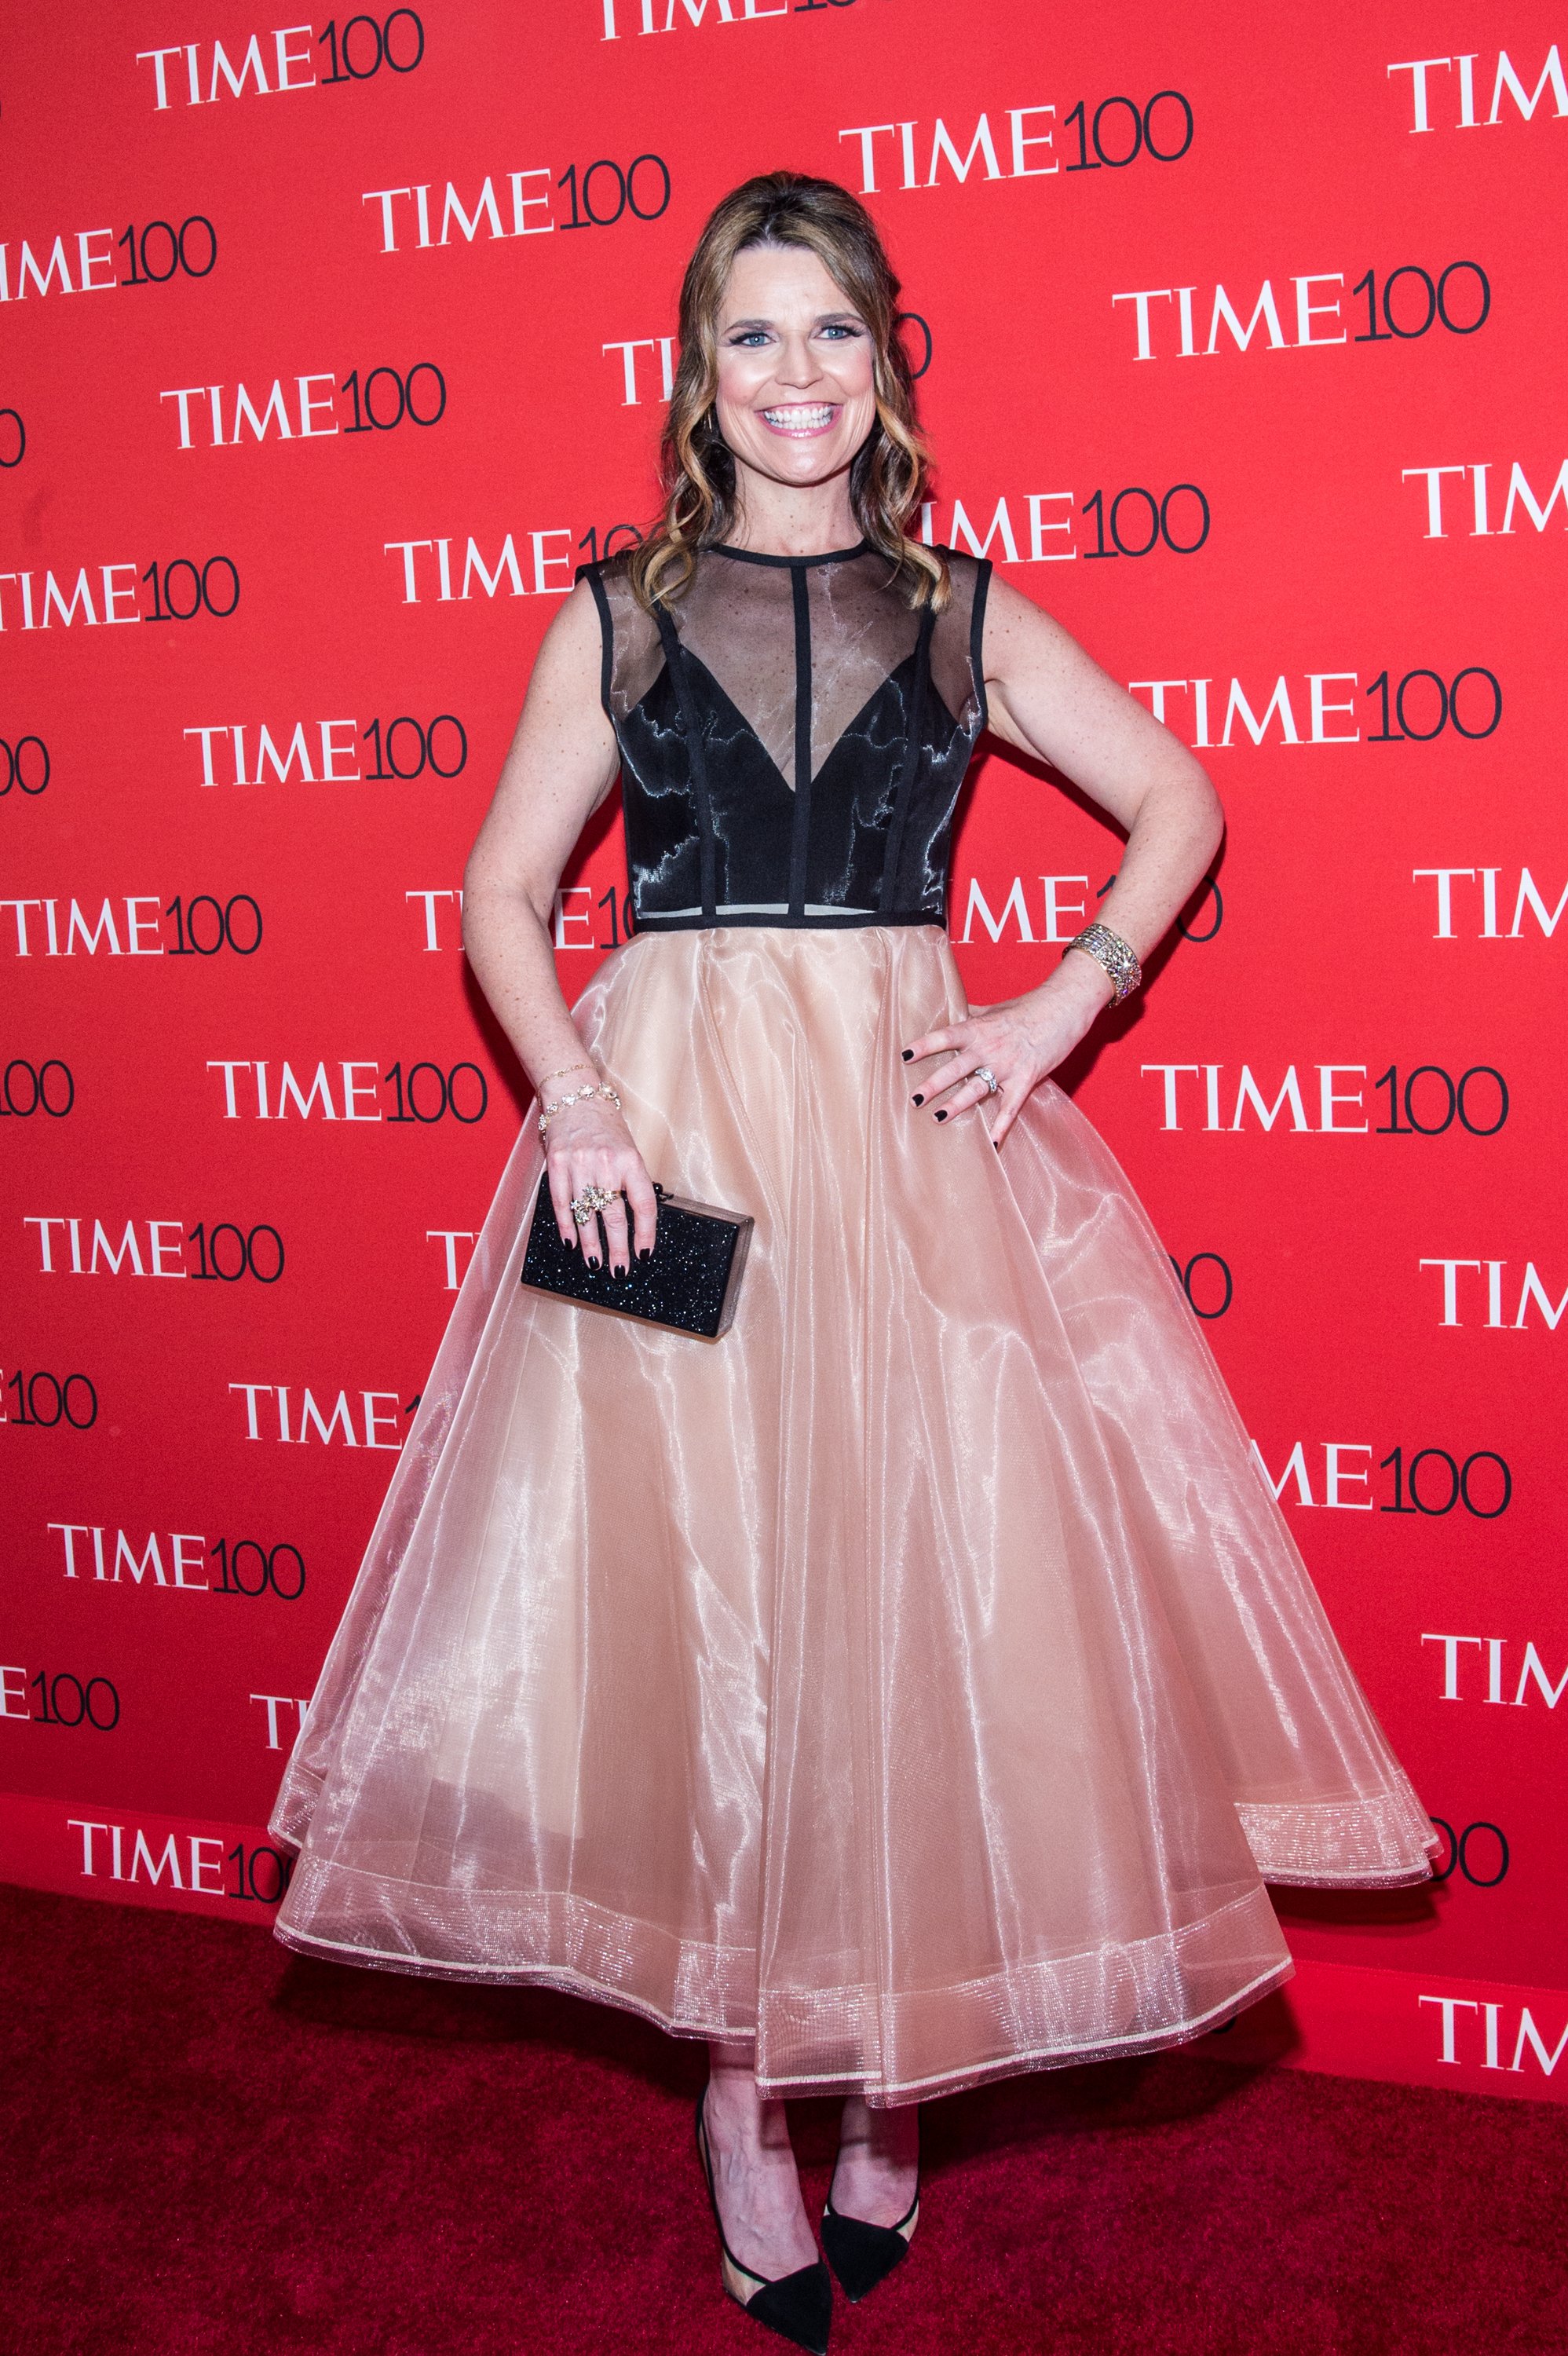 "The Today Show" Co-Host Savannah Guthrie attends the 2018 Time 100 Gala at Frederick P. Rose Hall, Jazz at Lincoln Center on April 24, 2018 in New York City. | Source: Getty Images